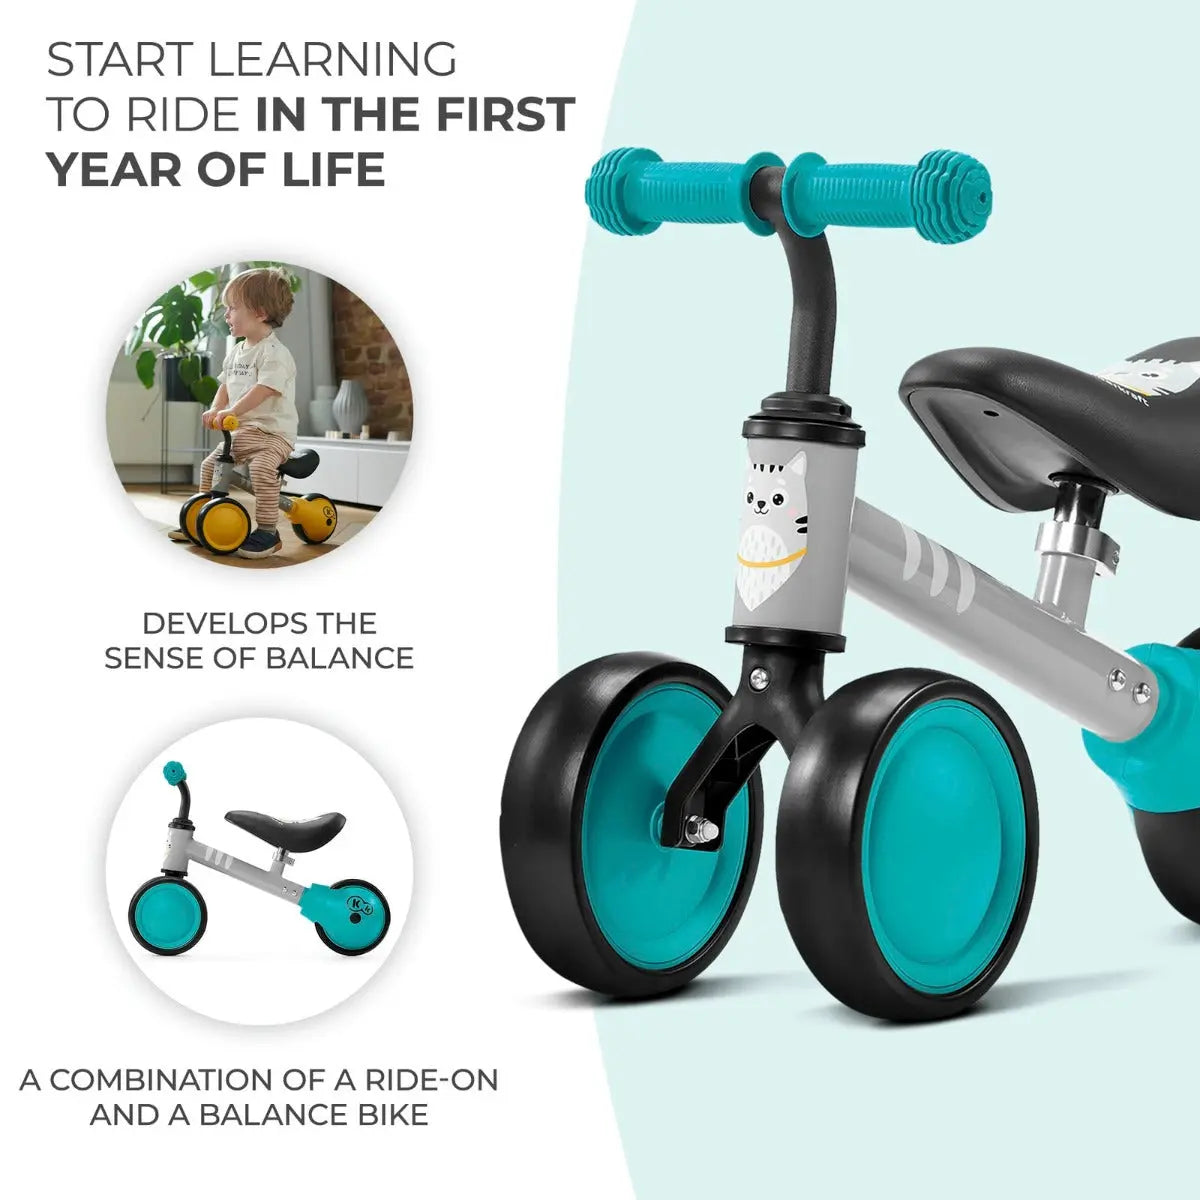 Child on a turquoise balance bike with kitten print, adjustable saddle, rubber handles, ball-bearing rear wheel, and steel frame for safe, durable play.